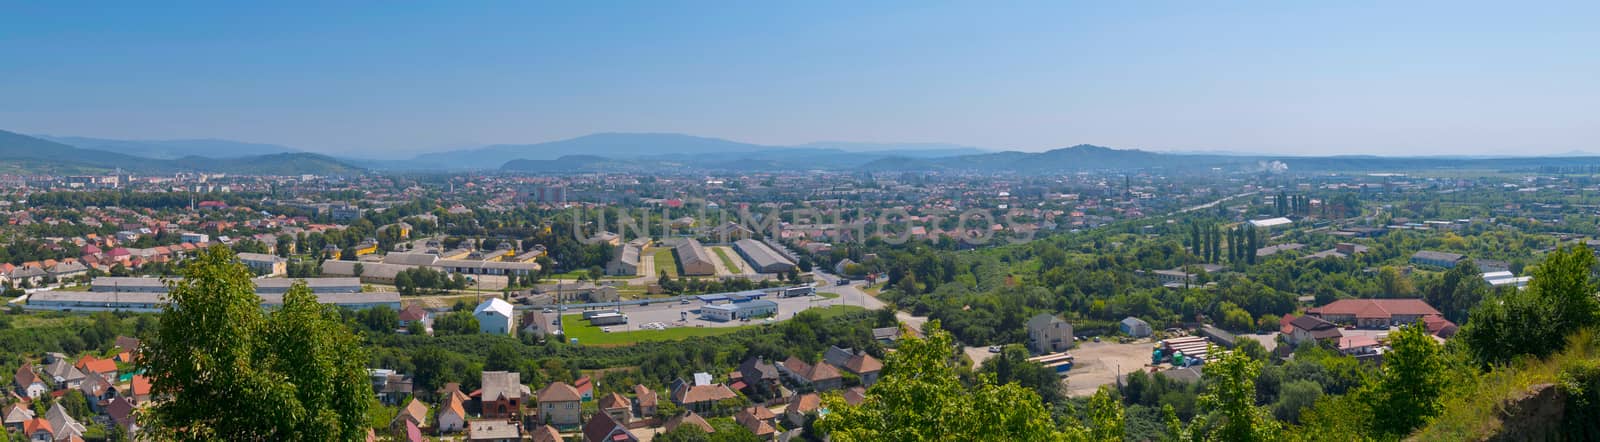 a magnificent panorama of the city with a beautiful nature lying in a green mountain valley by Adamchuk